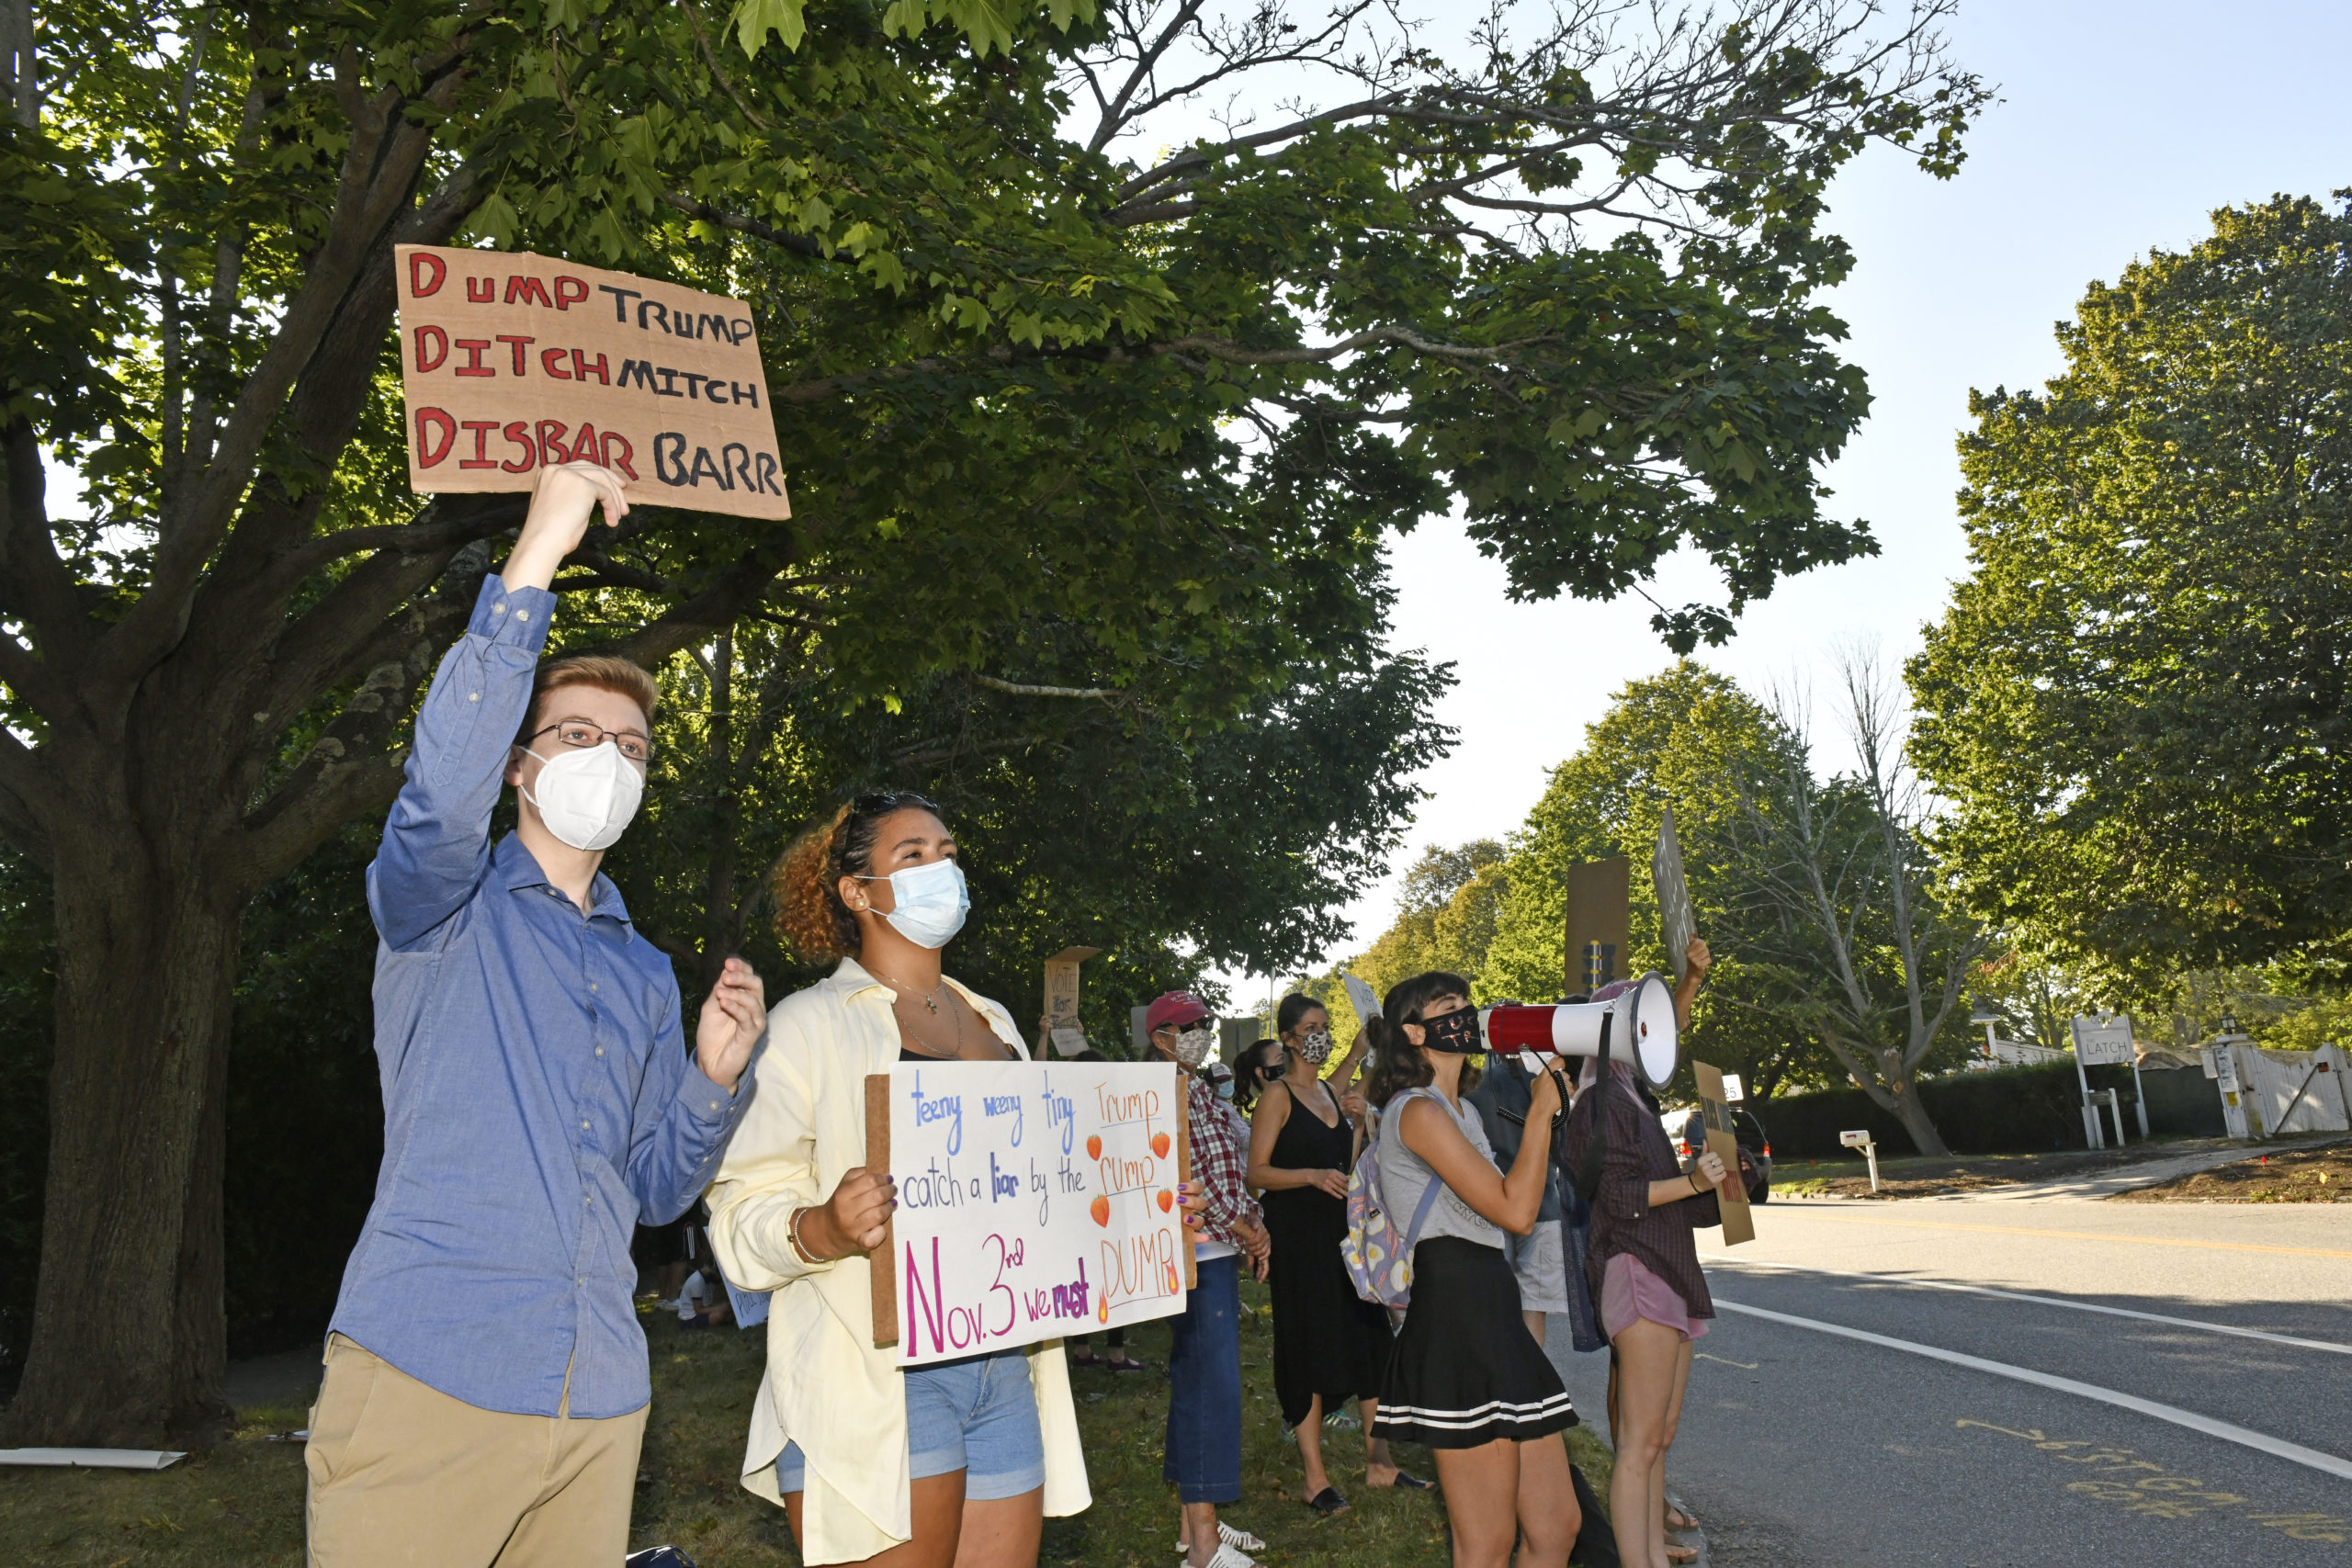 A protest was held in Southampton Village on Saturday afternoon during President Donald Trump's visit for a fundraising event.   DANA SHAW